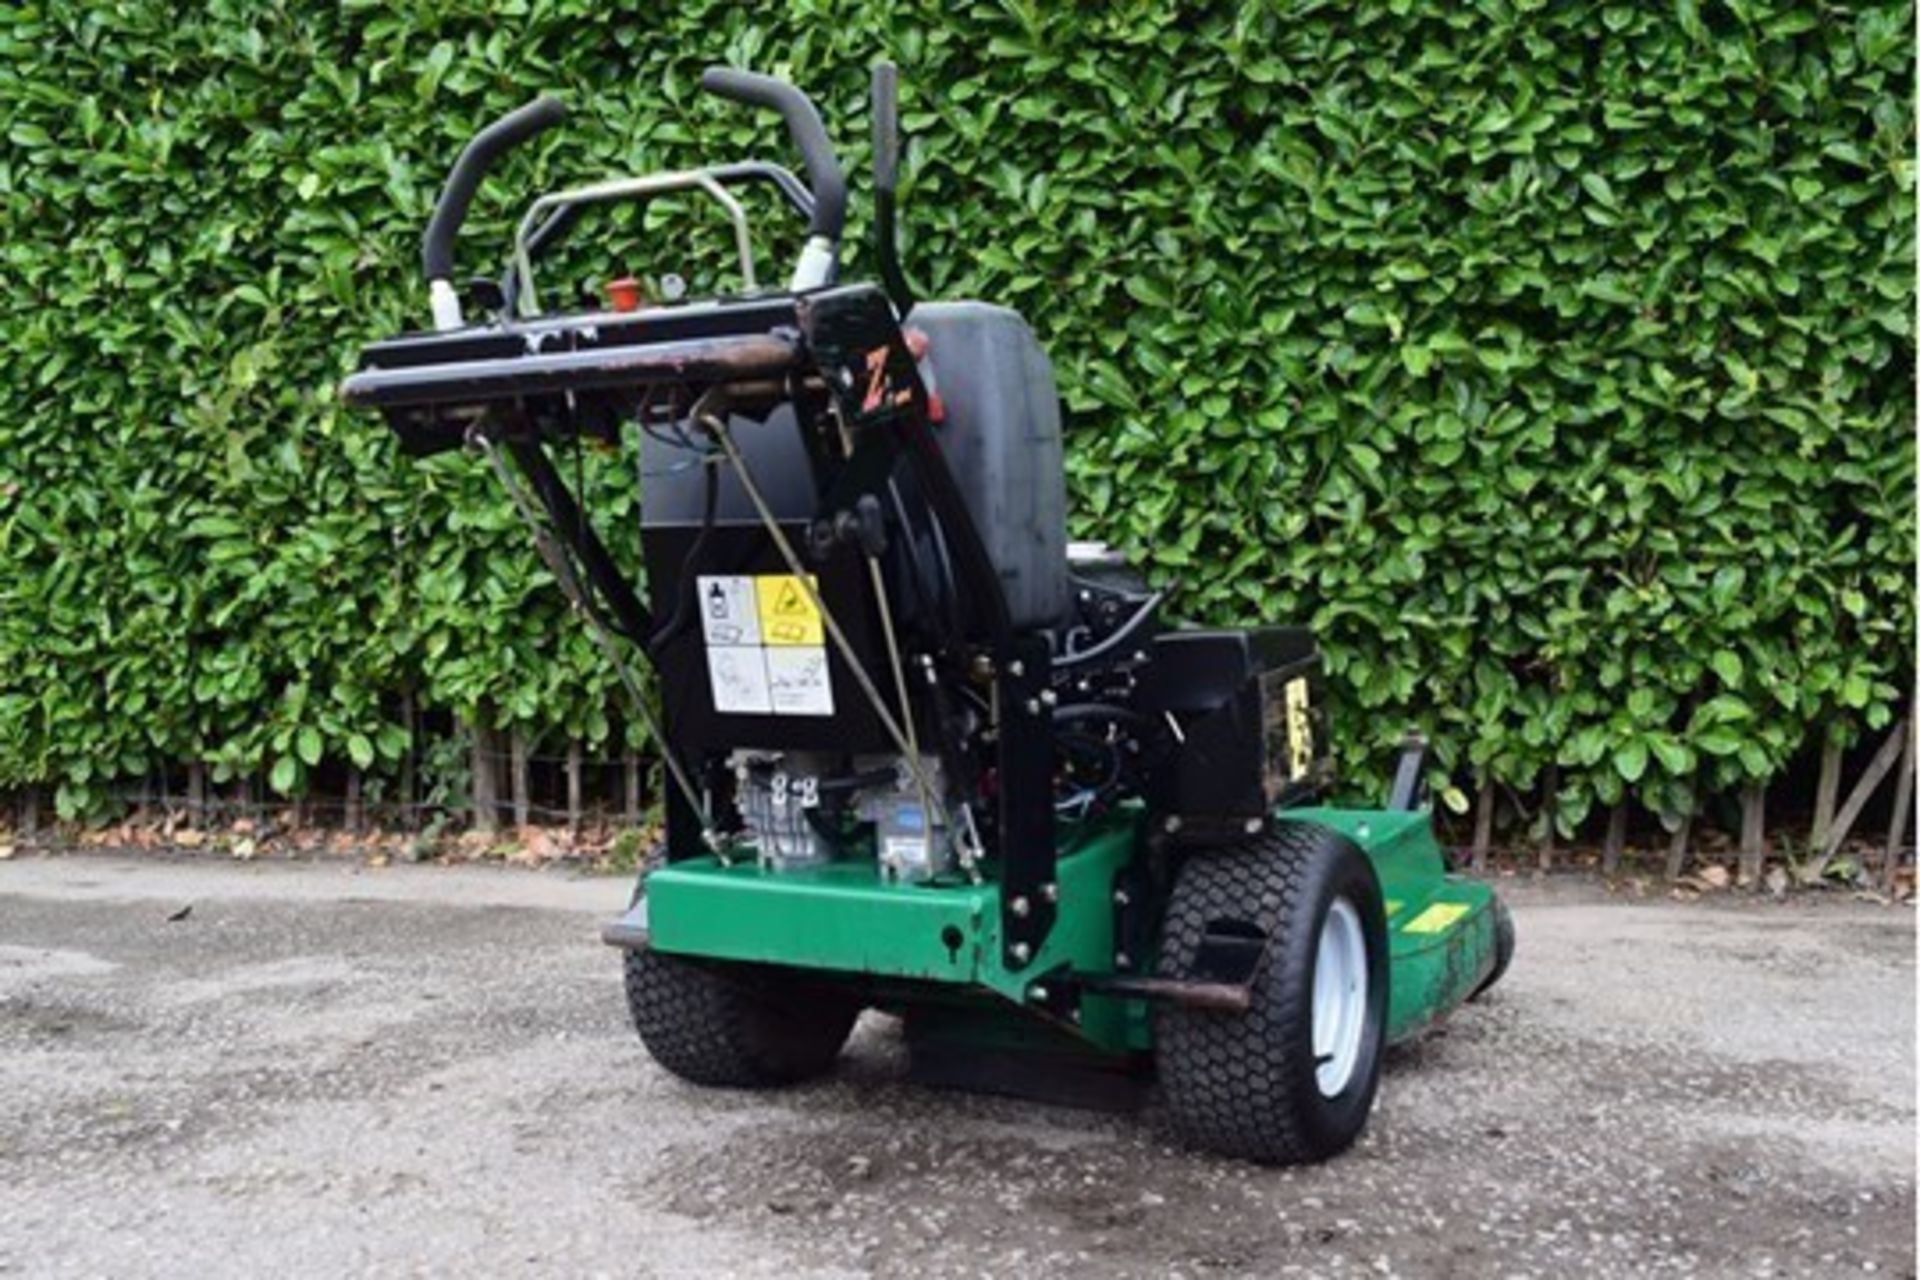 2011 Ransomes Pedestrian 36" Commercial Mower - Image 3 of 8